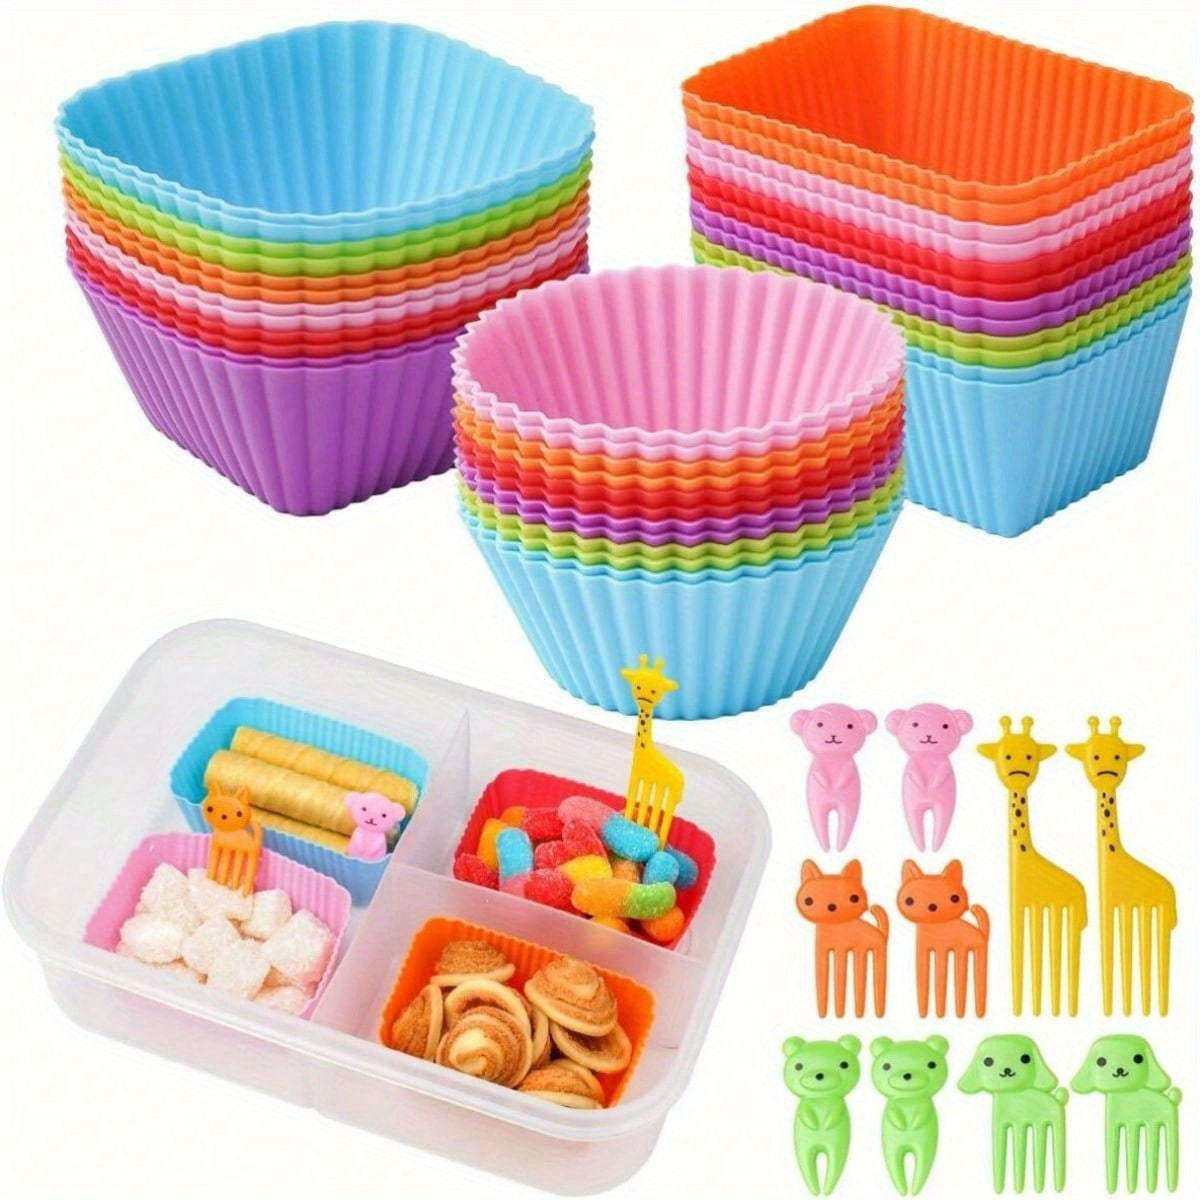 

46-piece Silicone Baking Cups Set With Food Dividers, Bpa-free Durable Reusable Muffin Liners, Microwave Oven Freezer Dishwasher Safe Lunch Accessories